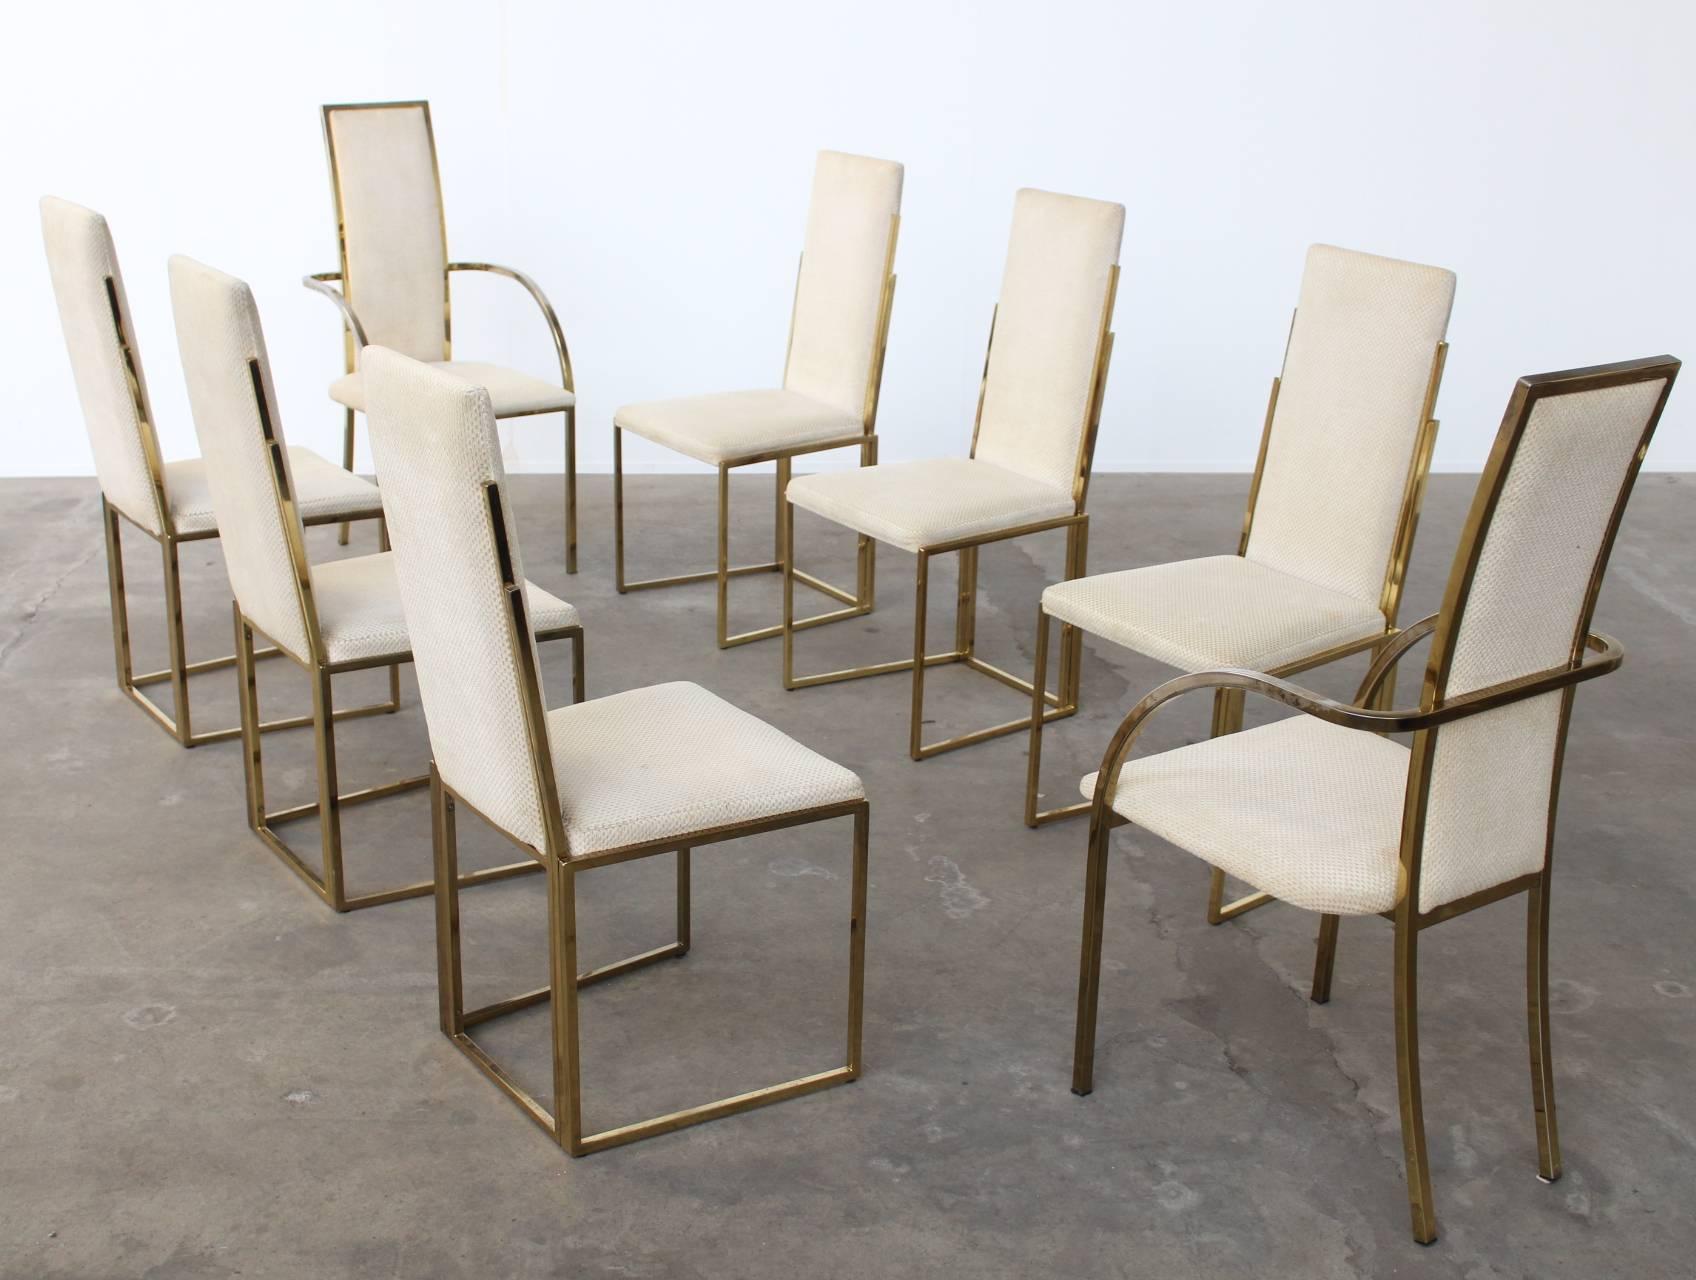 Very exclusive and beautifully crafted set of 8 dining chairs by Romeo Rega. The textured natural chenille upholstery feels very soft and smooth and is in great condition, an ultimate example of the Hollywood regency style and a true eye catcher.